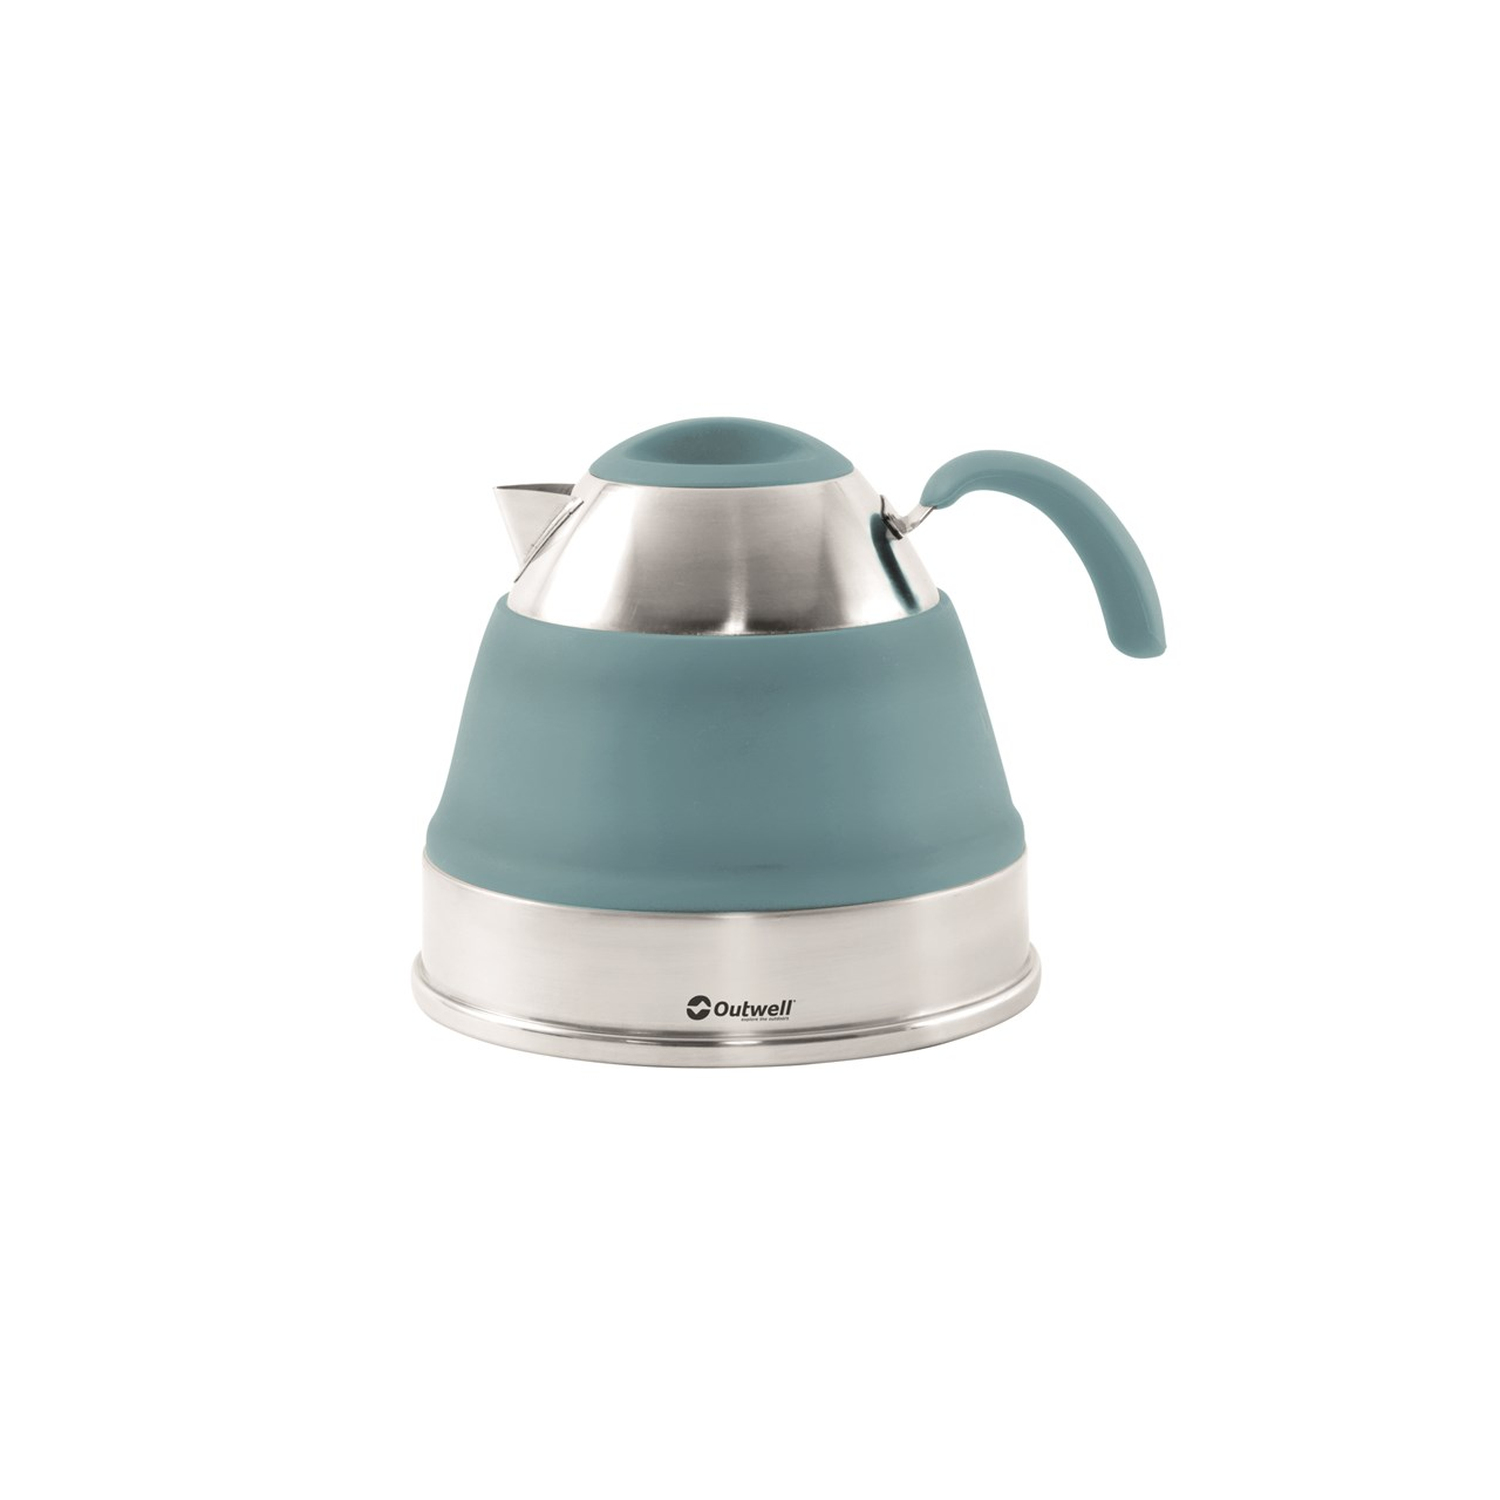 Outwell Collaps Kettle 2,5L classic blue